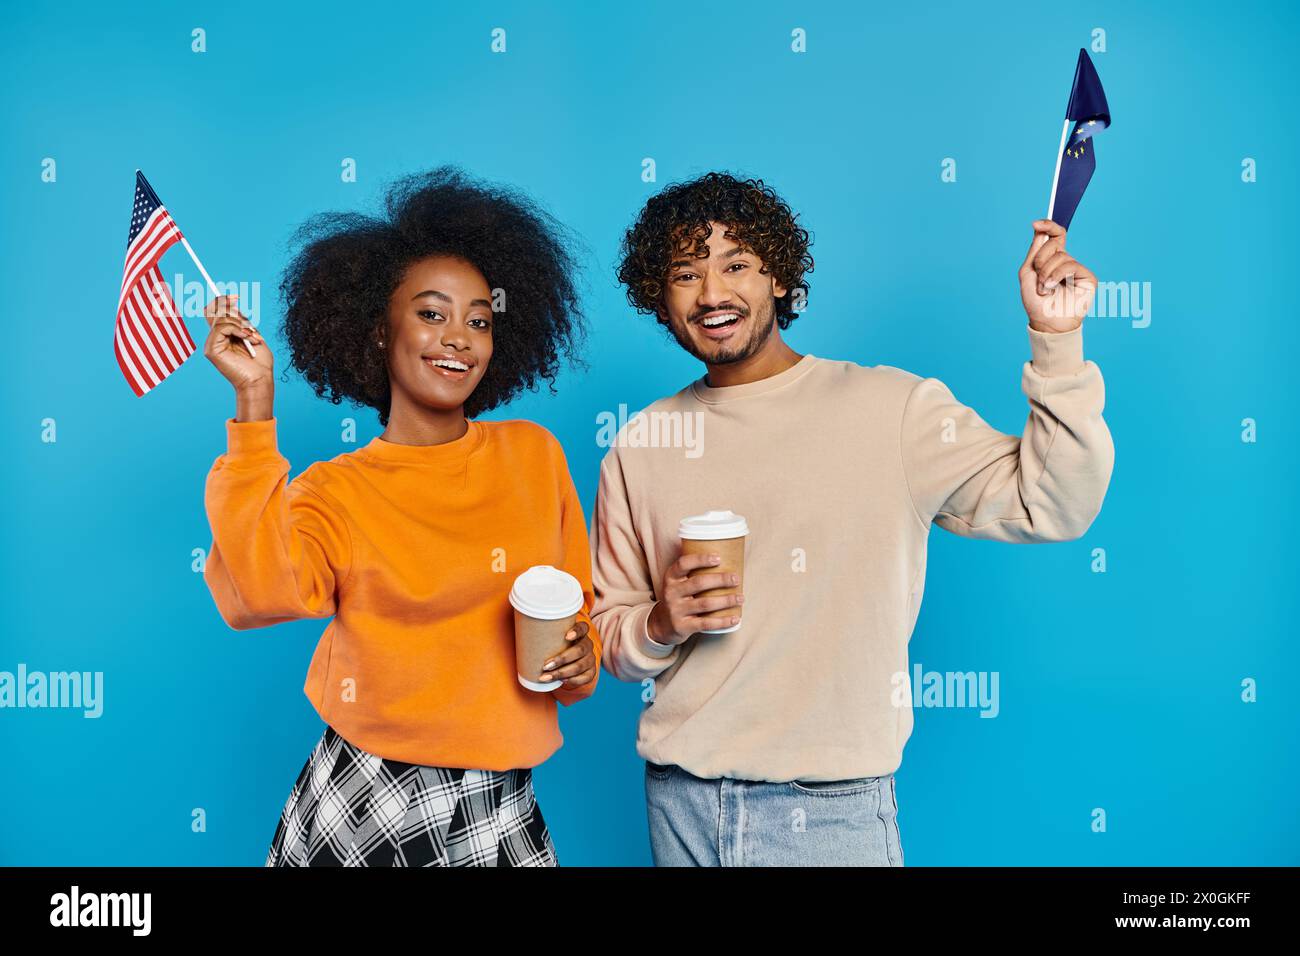 An interracial couple, dressed casually, proudly hold American flags against a blue backdrop. Stock Photo